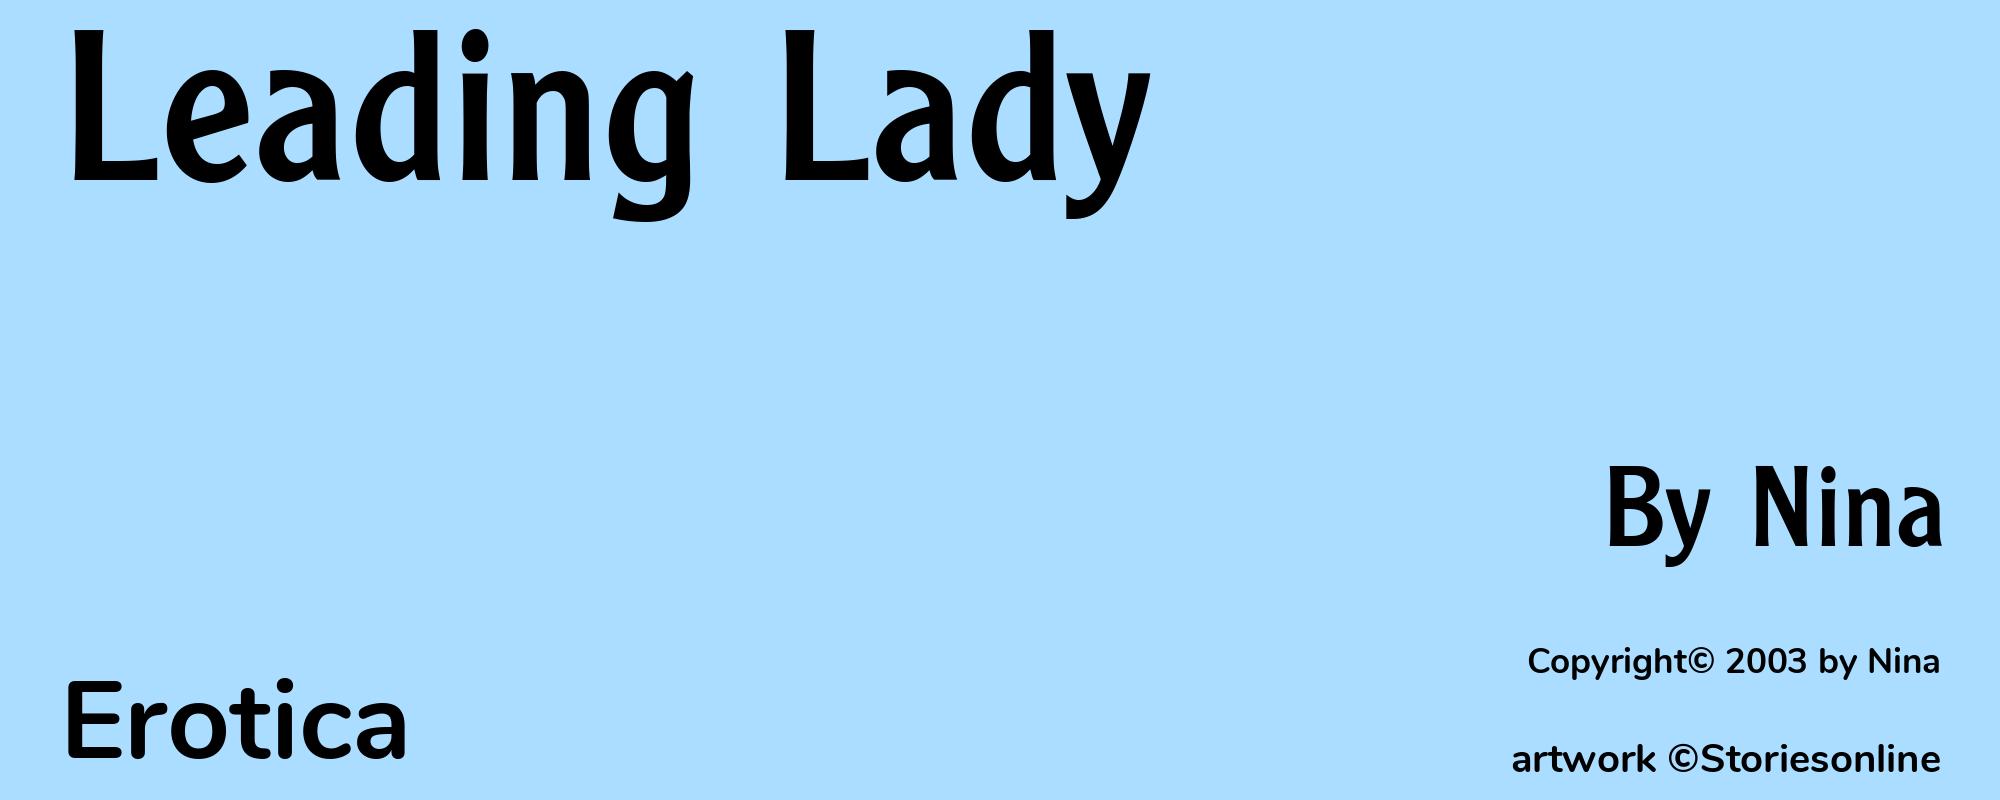 Leading Lady - Cover